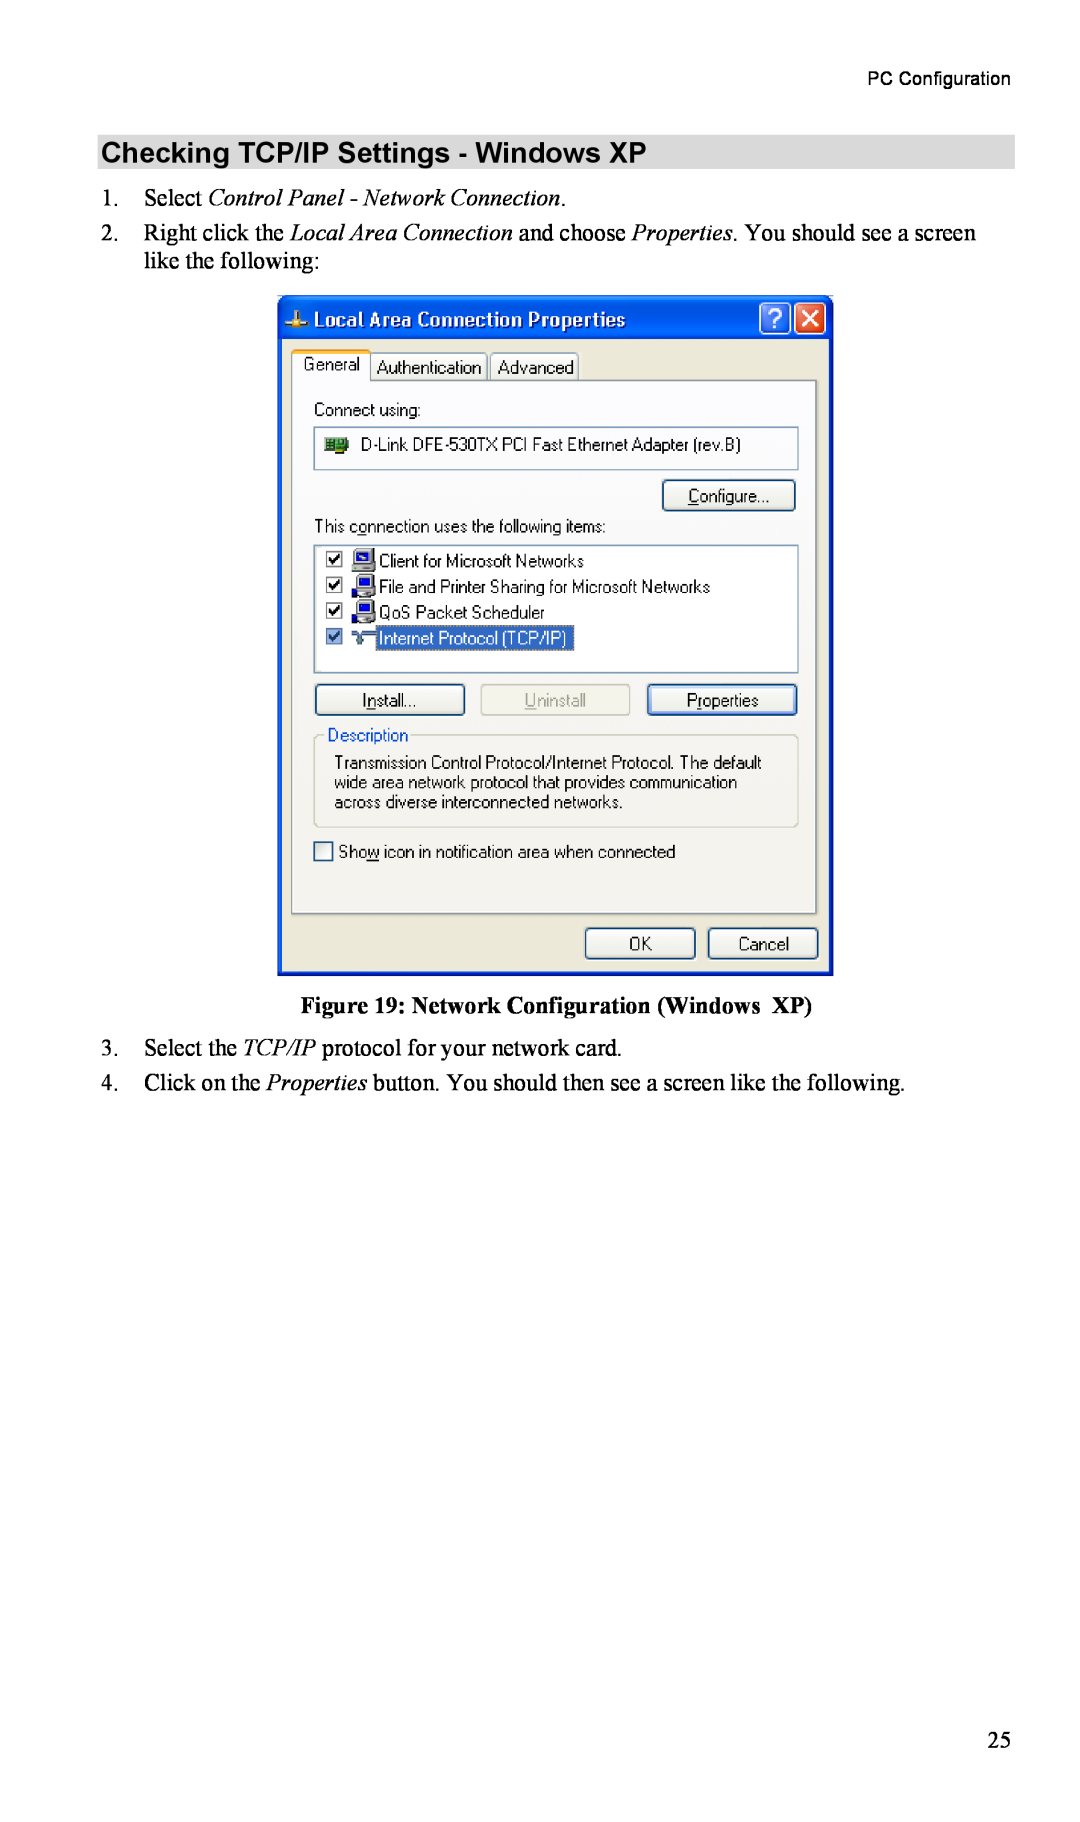 TRENDnet TW100-BRM504 Checking TCP/IP Settings - Windows XP, Select Control Panel - Network Connection, PC Configuration 